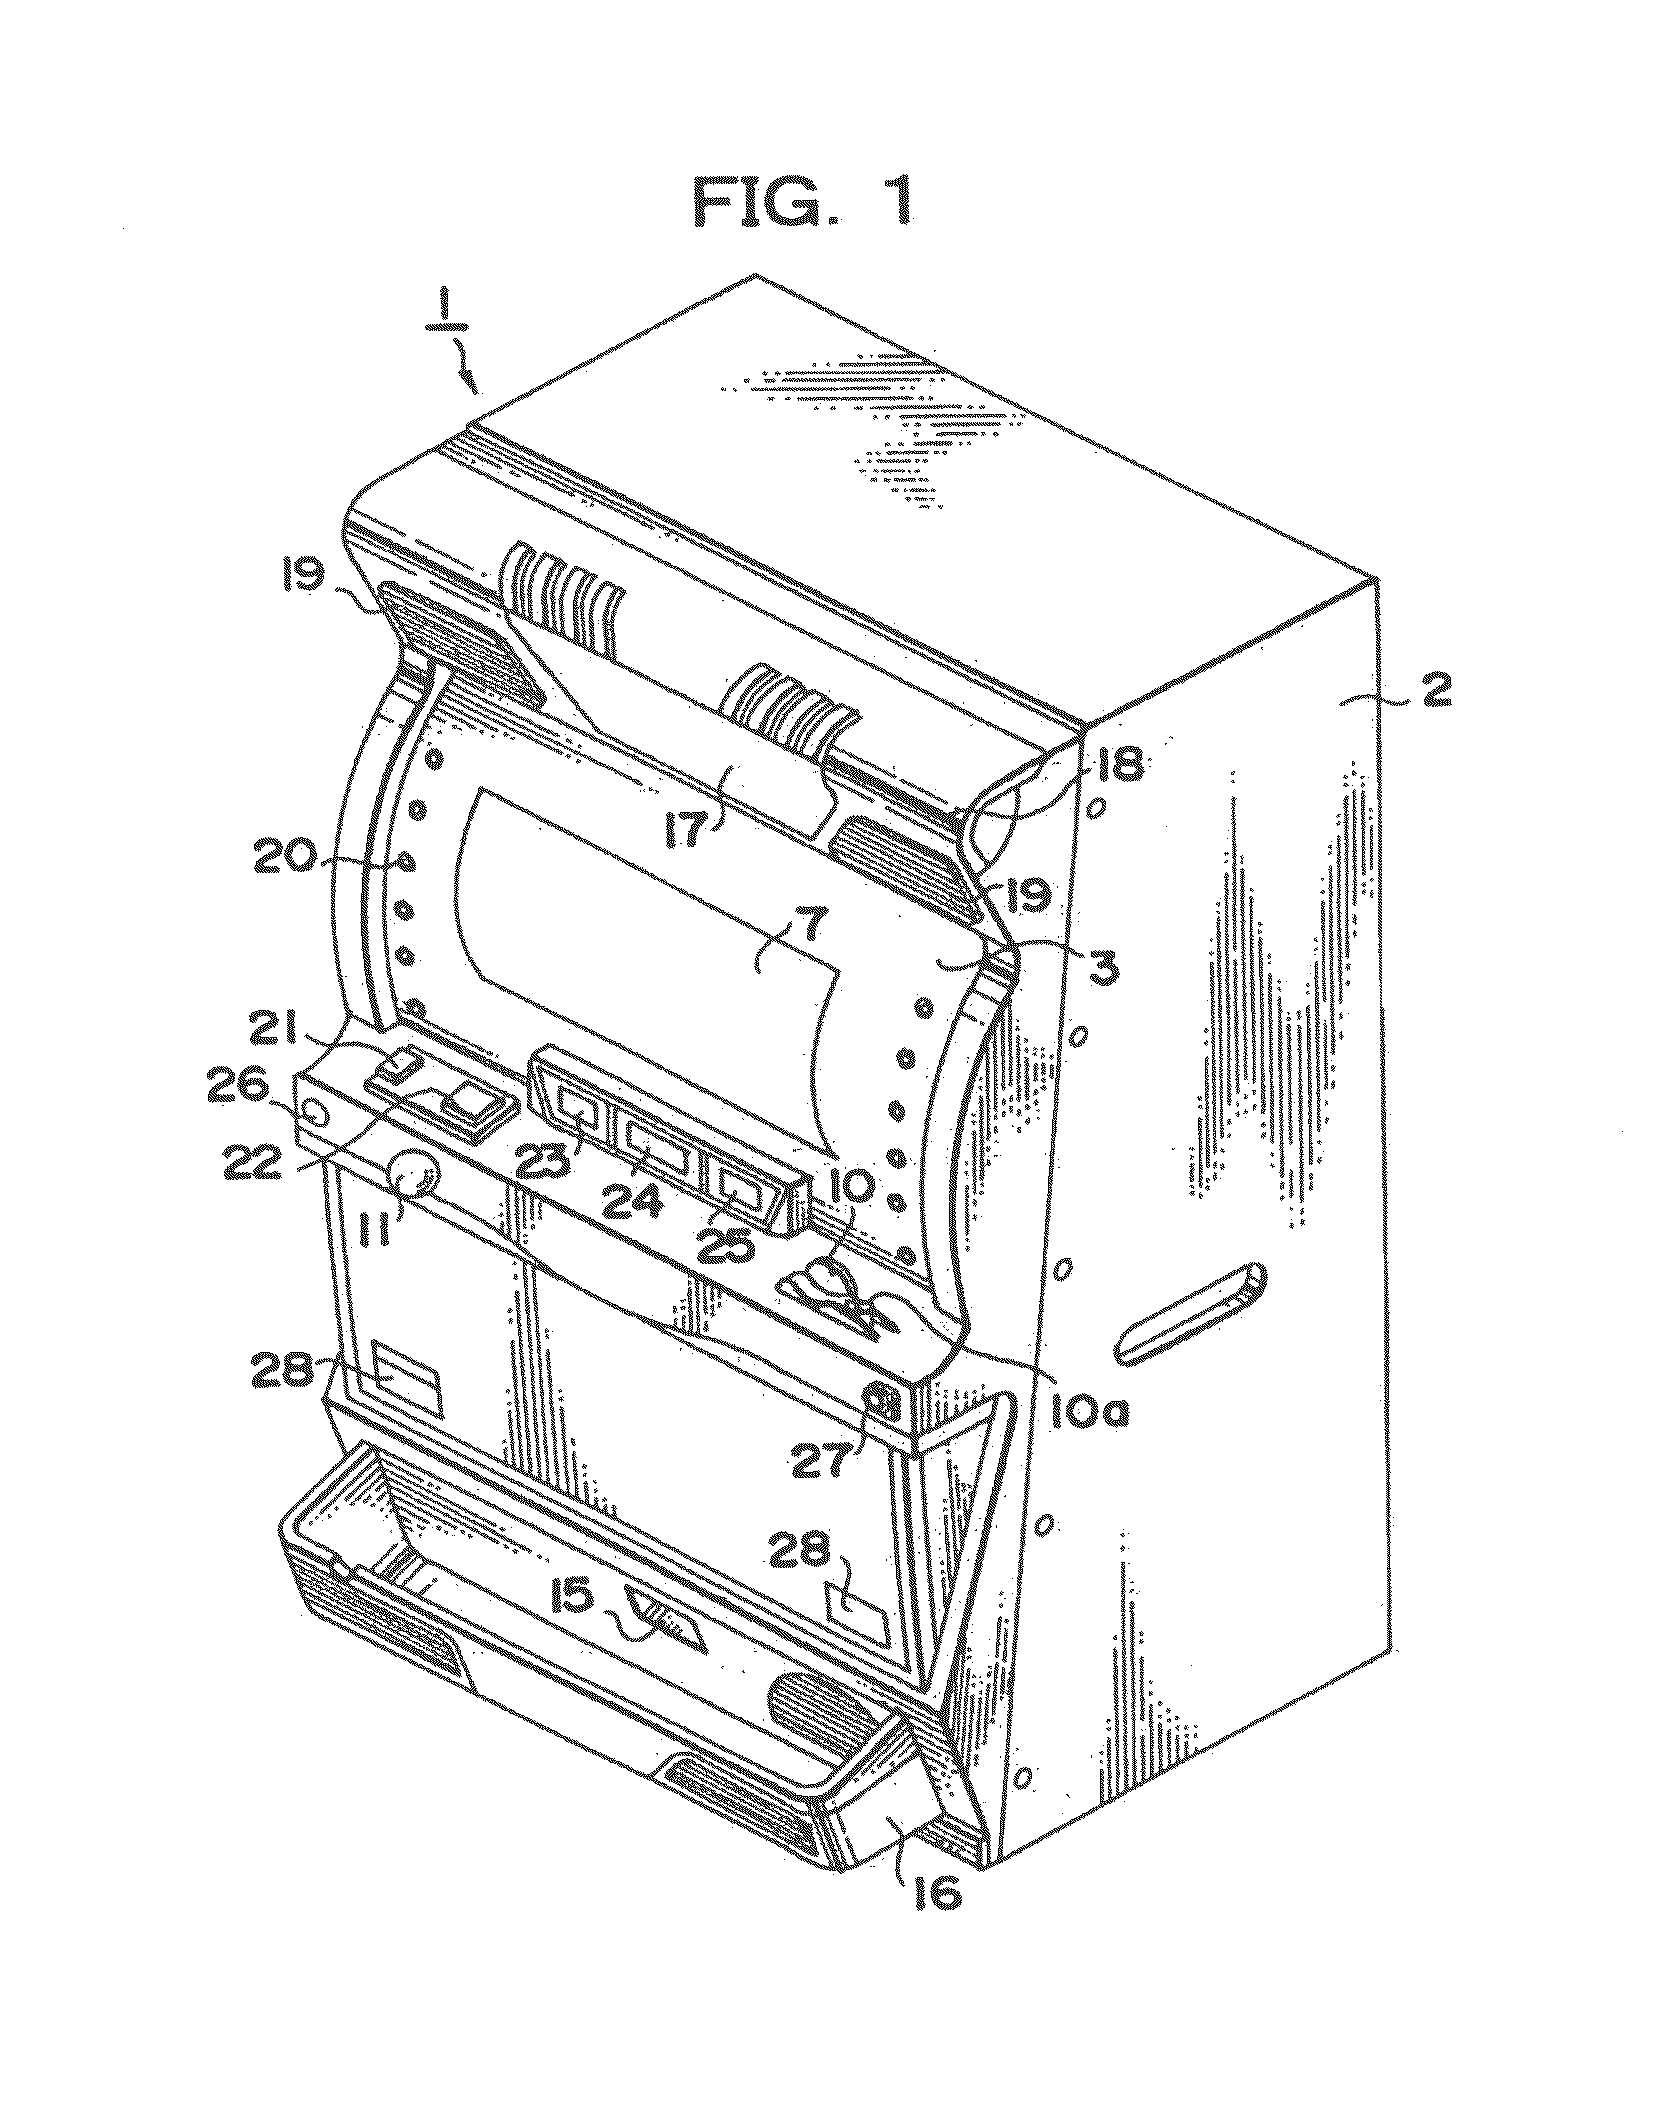 Gaming machine and methods of allowing a player to play gaming machines having selectable reel configurations